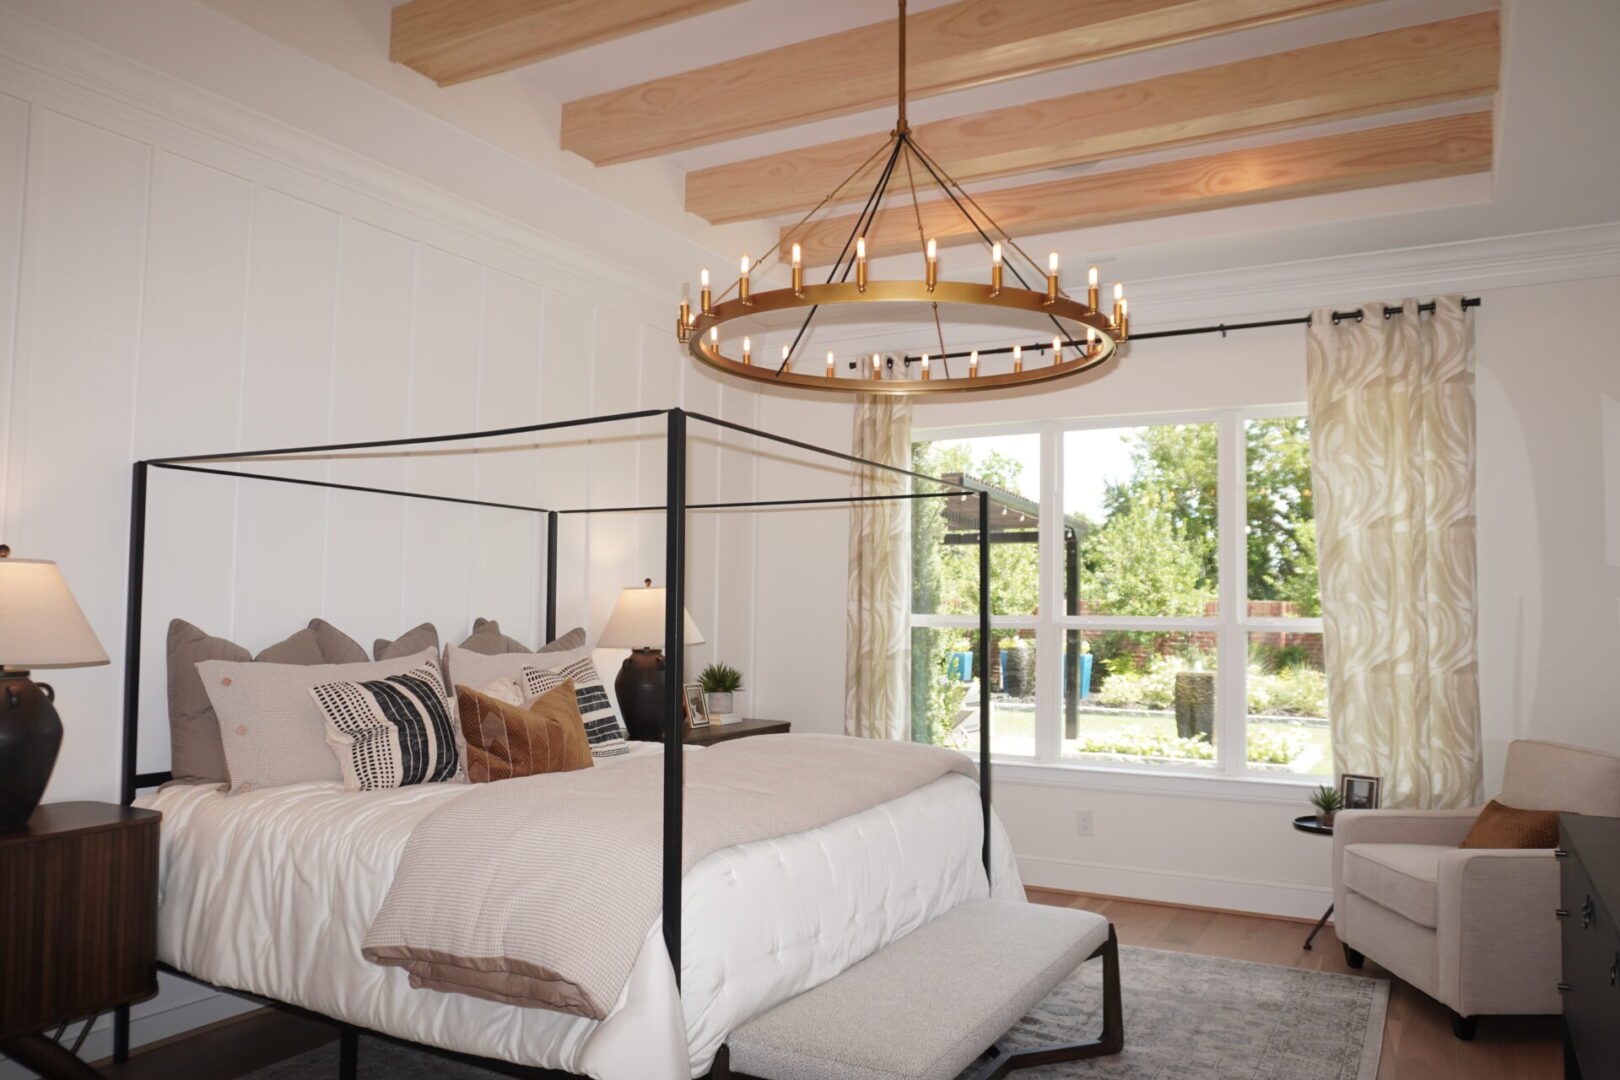 A bedroom with a bed, bench and ceiling light.